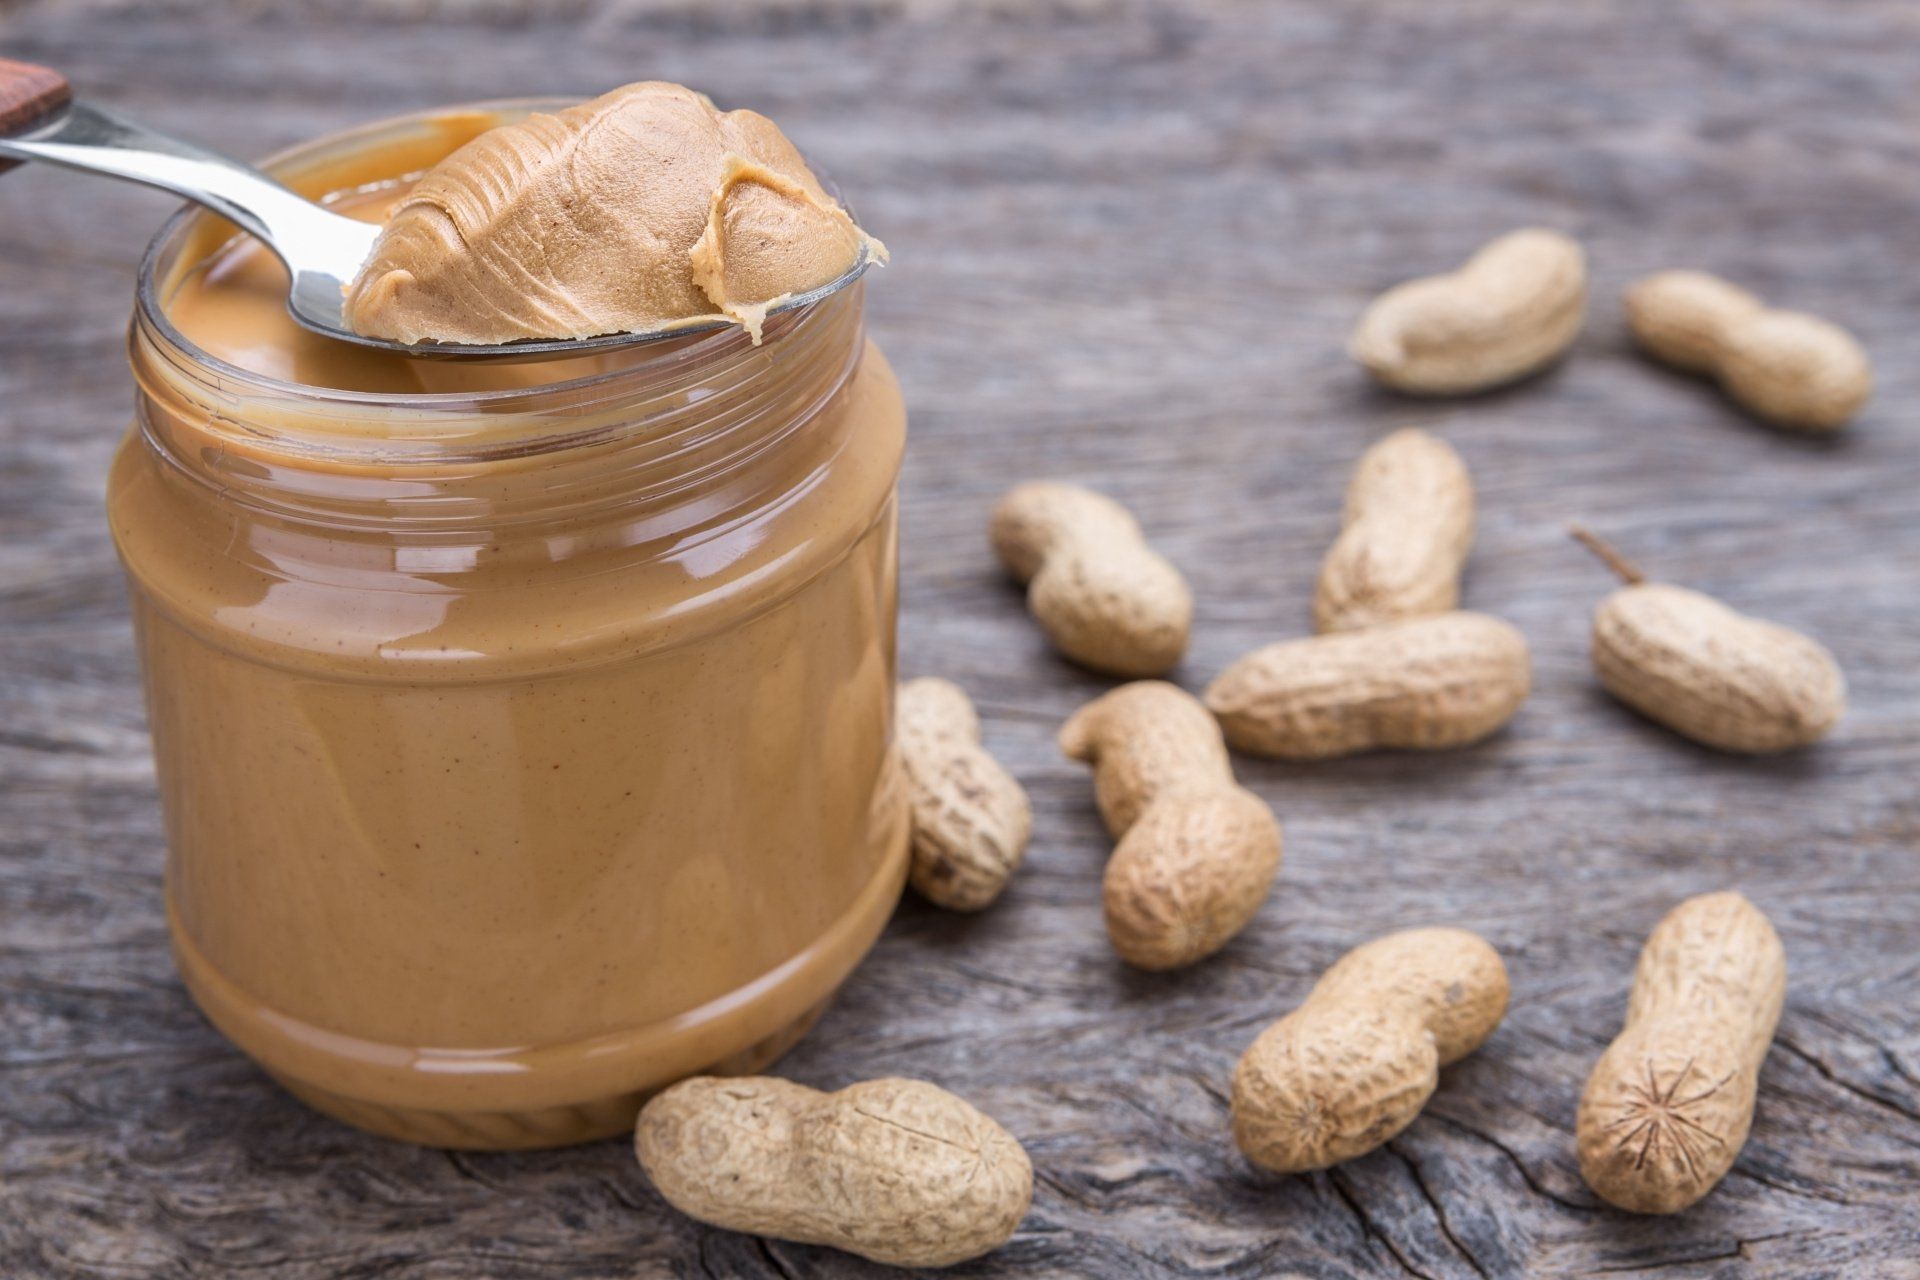 Spoon scooping peanut butter out of a jar.